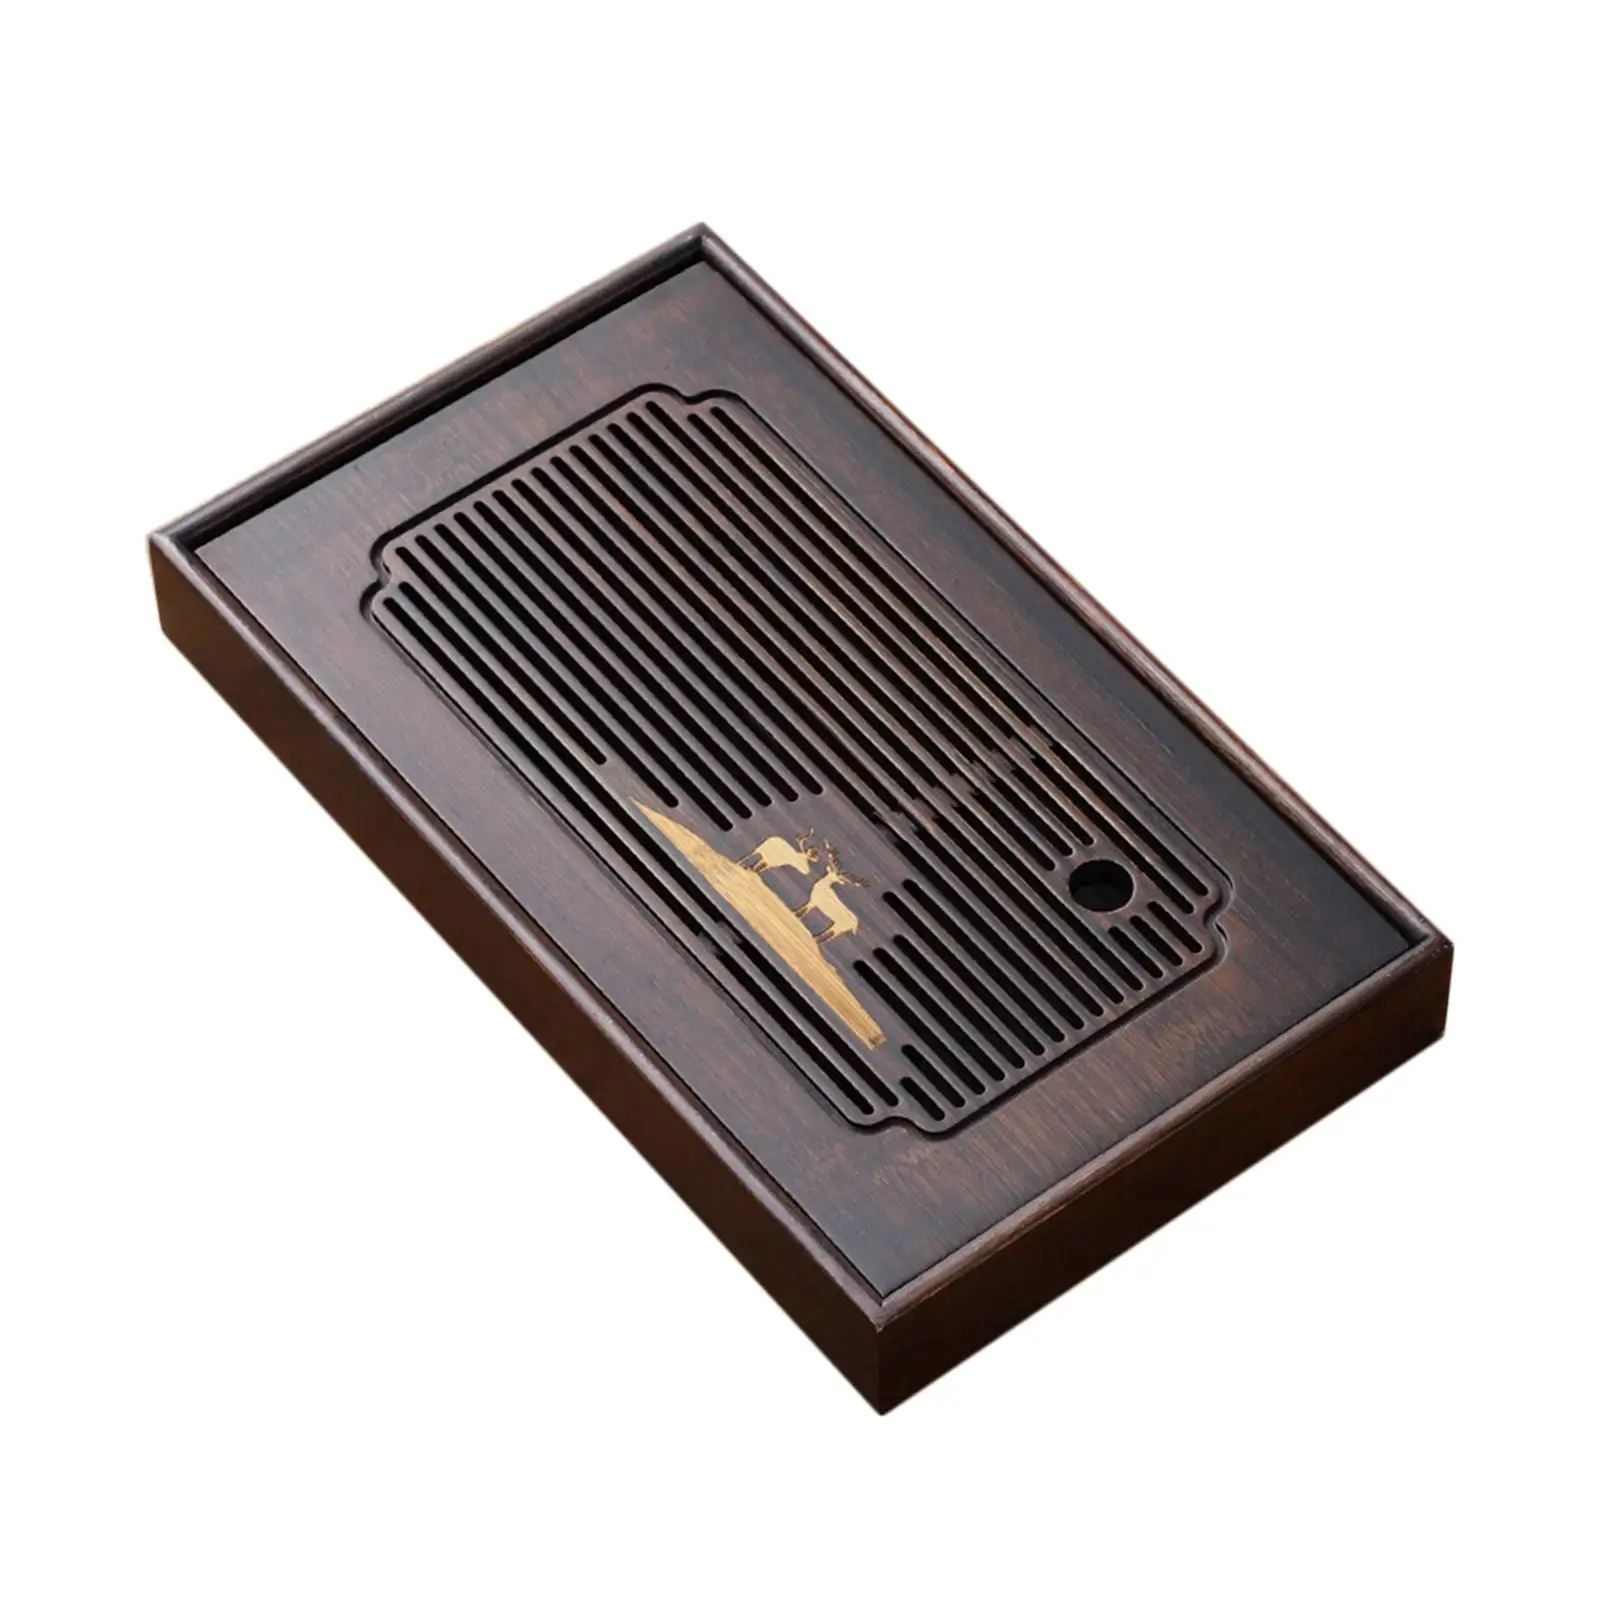 Tea Tray with Water Storage Drainage Durable Tea Set Tray Simple Mini Bamboo Chinese Tea Tray Tea Serving Tray for Tea Room Home